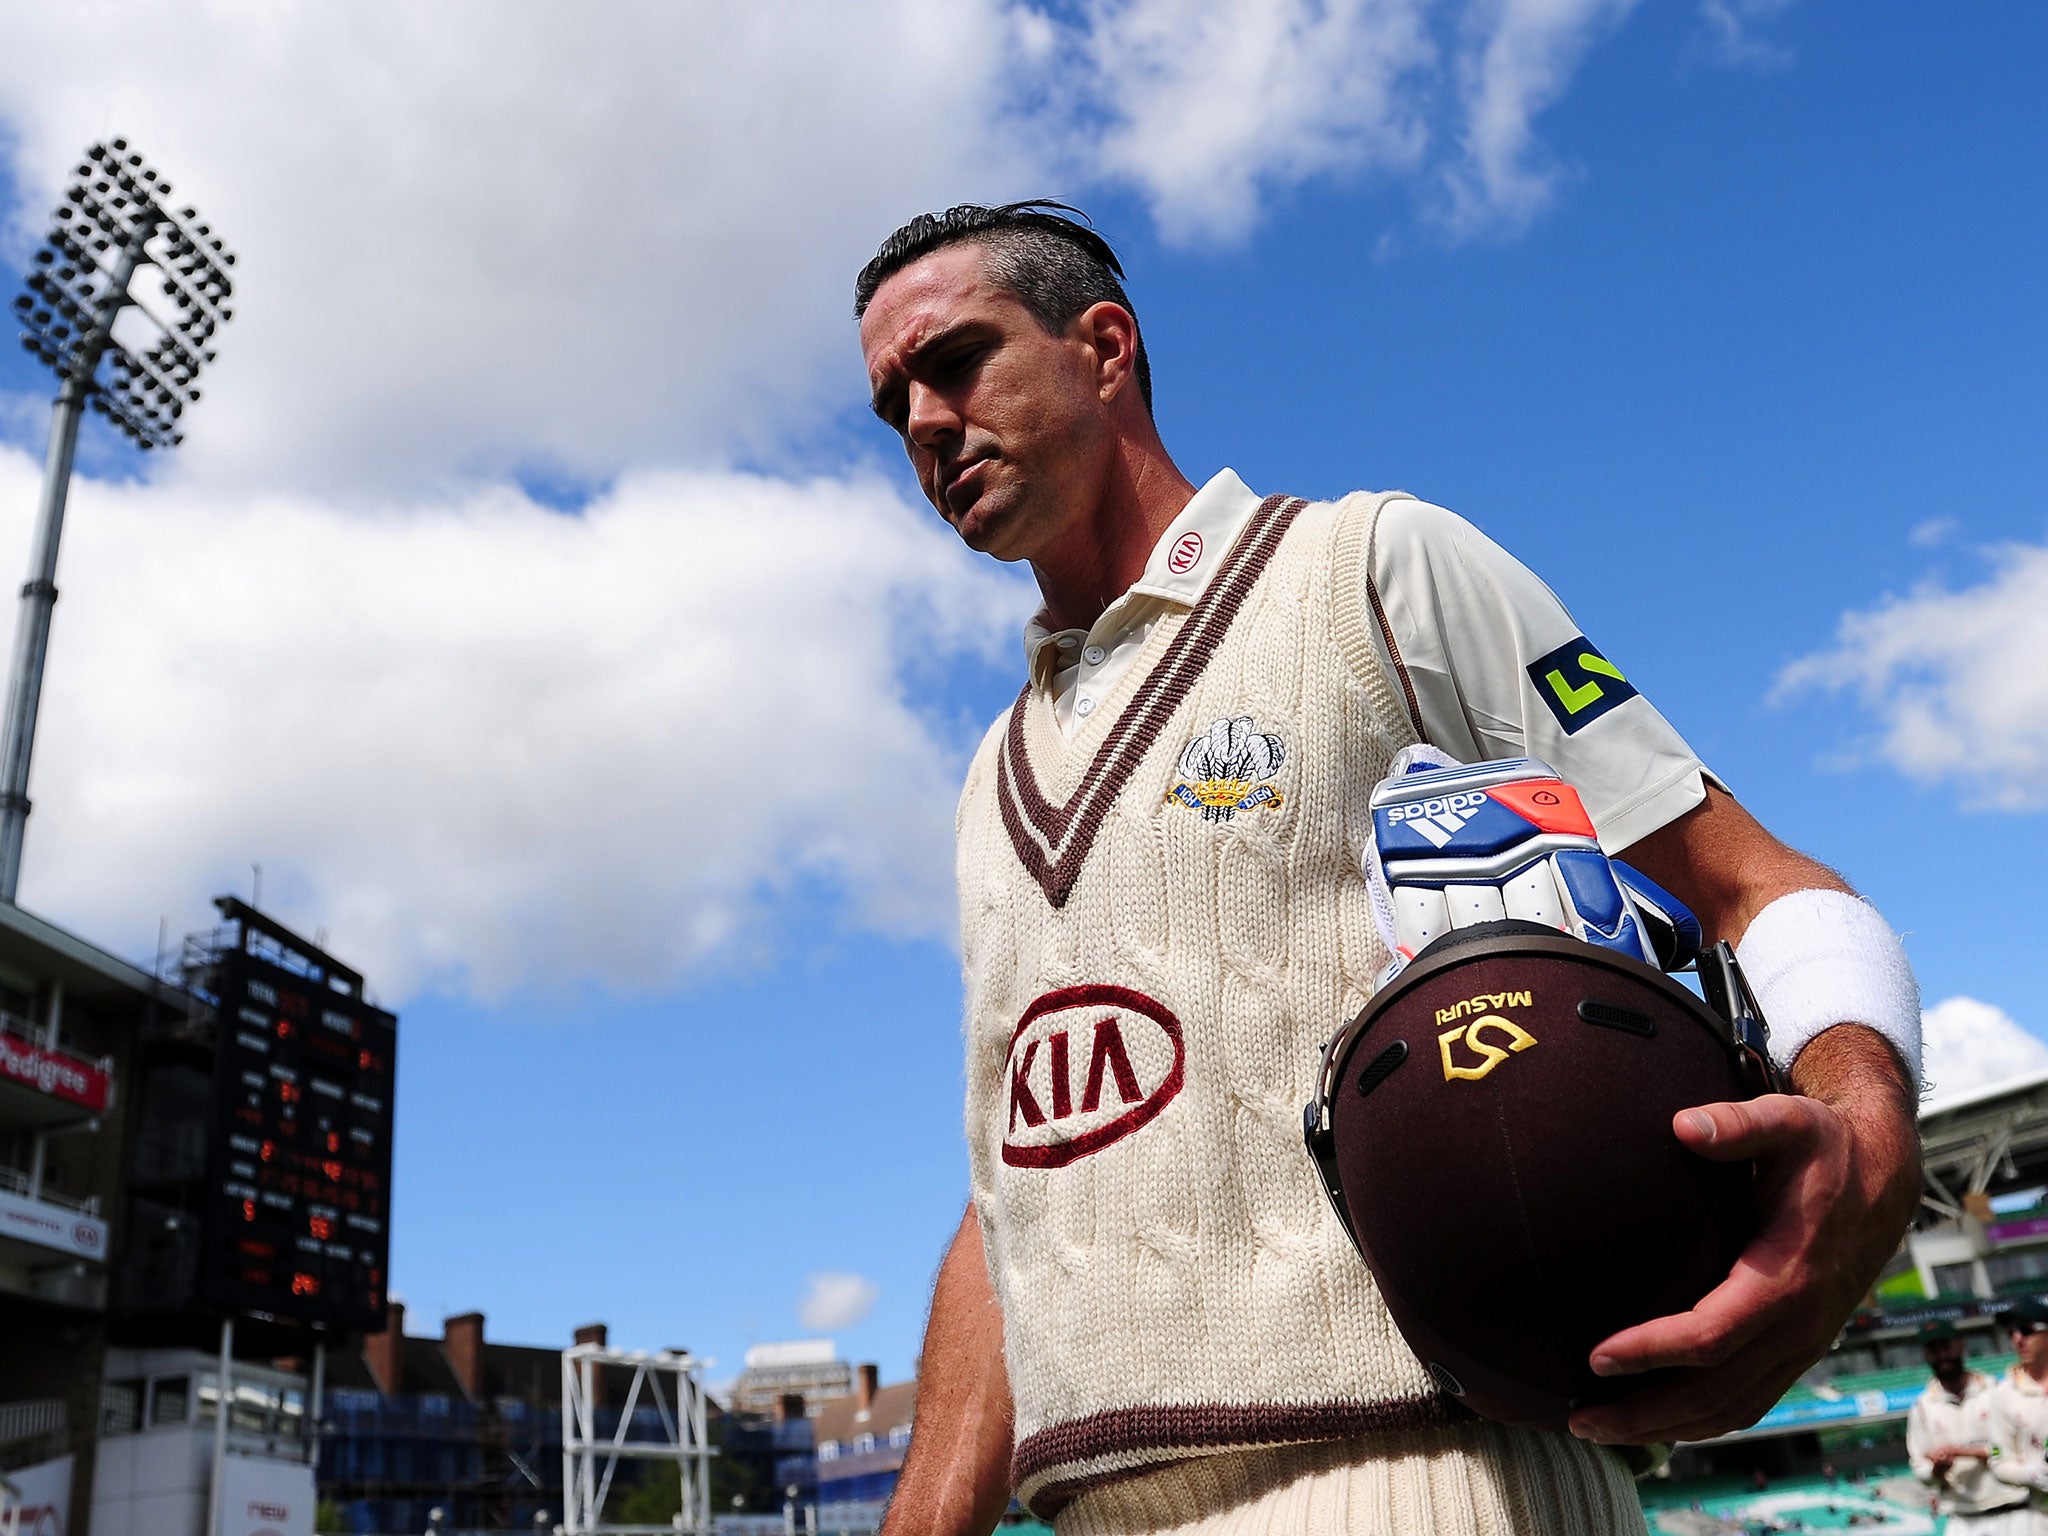 Kevin Pietersen hit 355 not out for Surrey this week